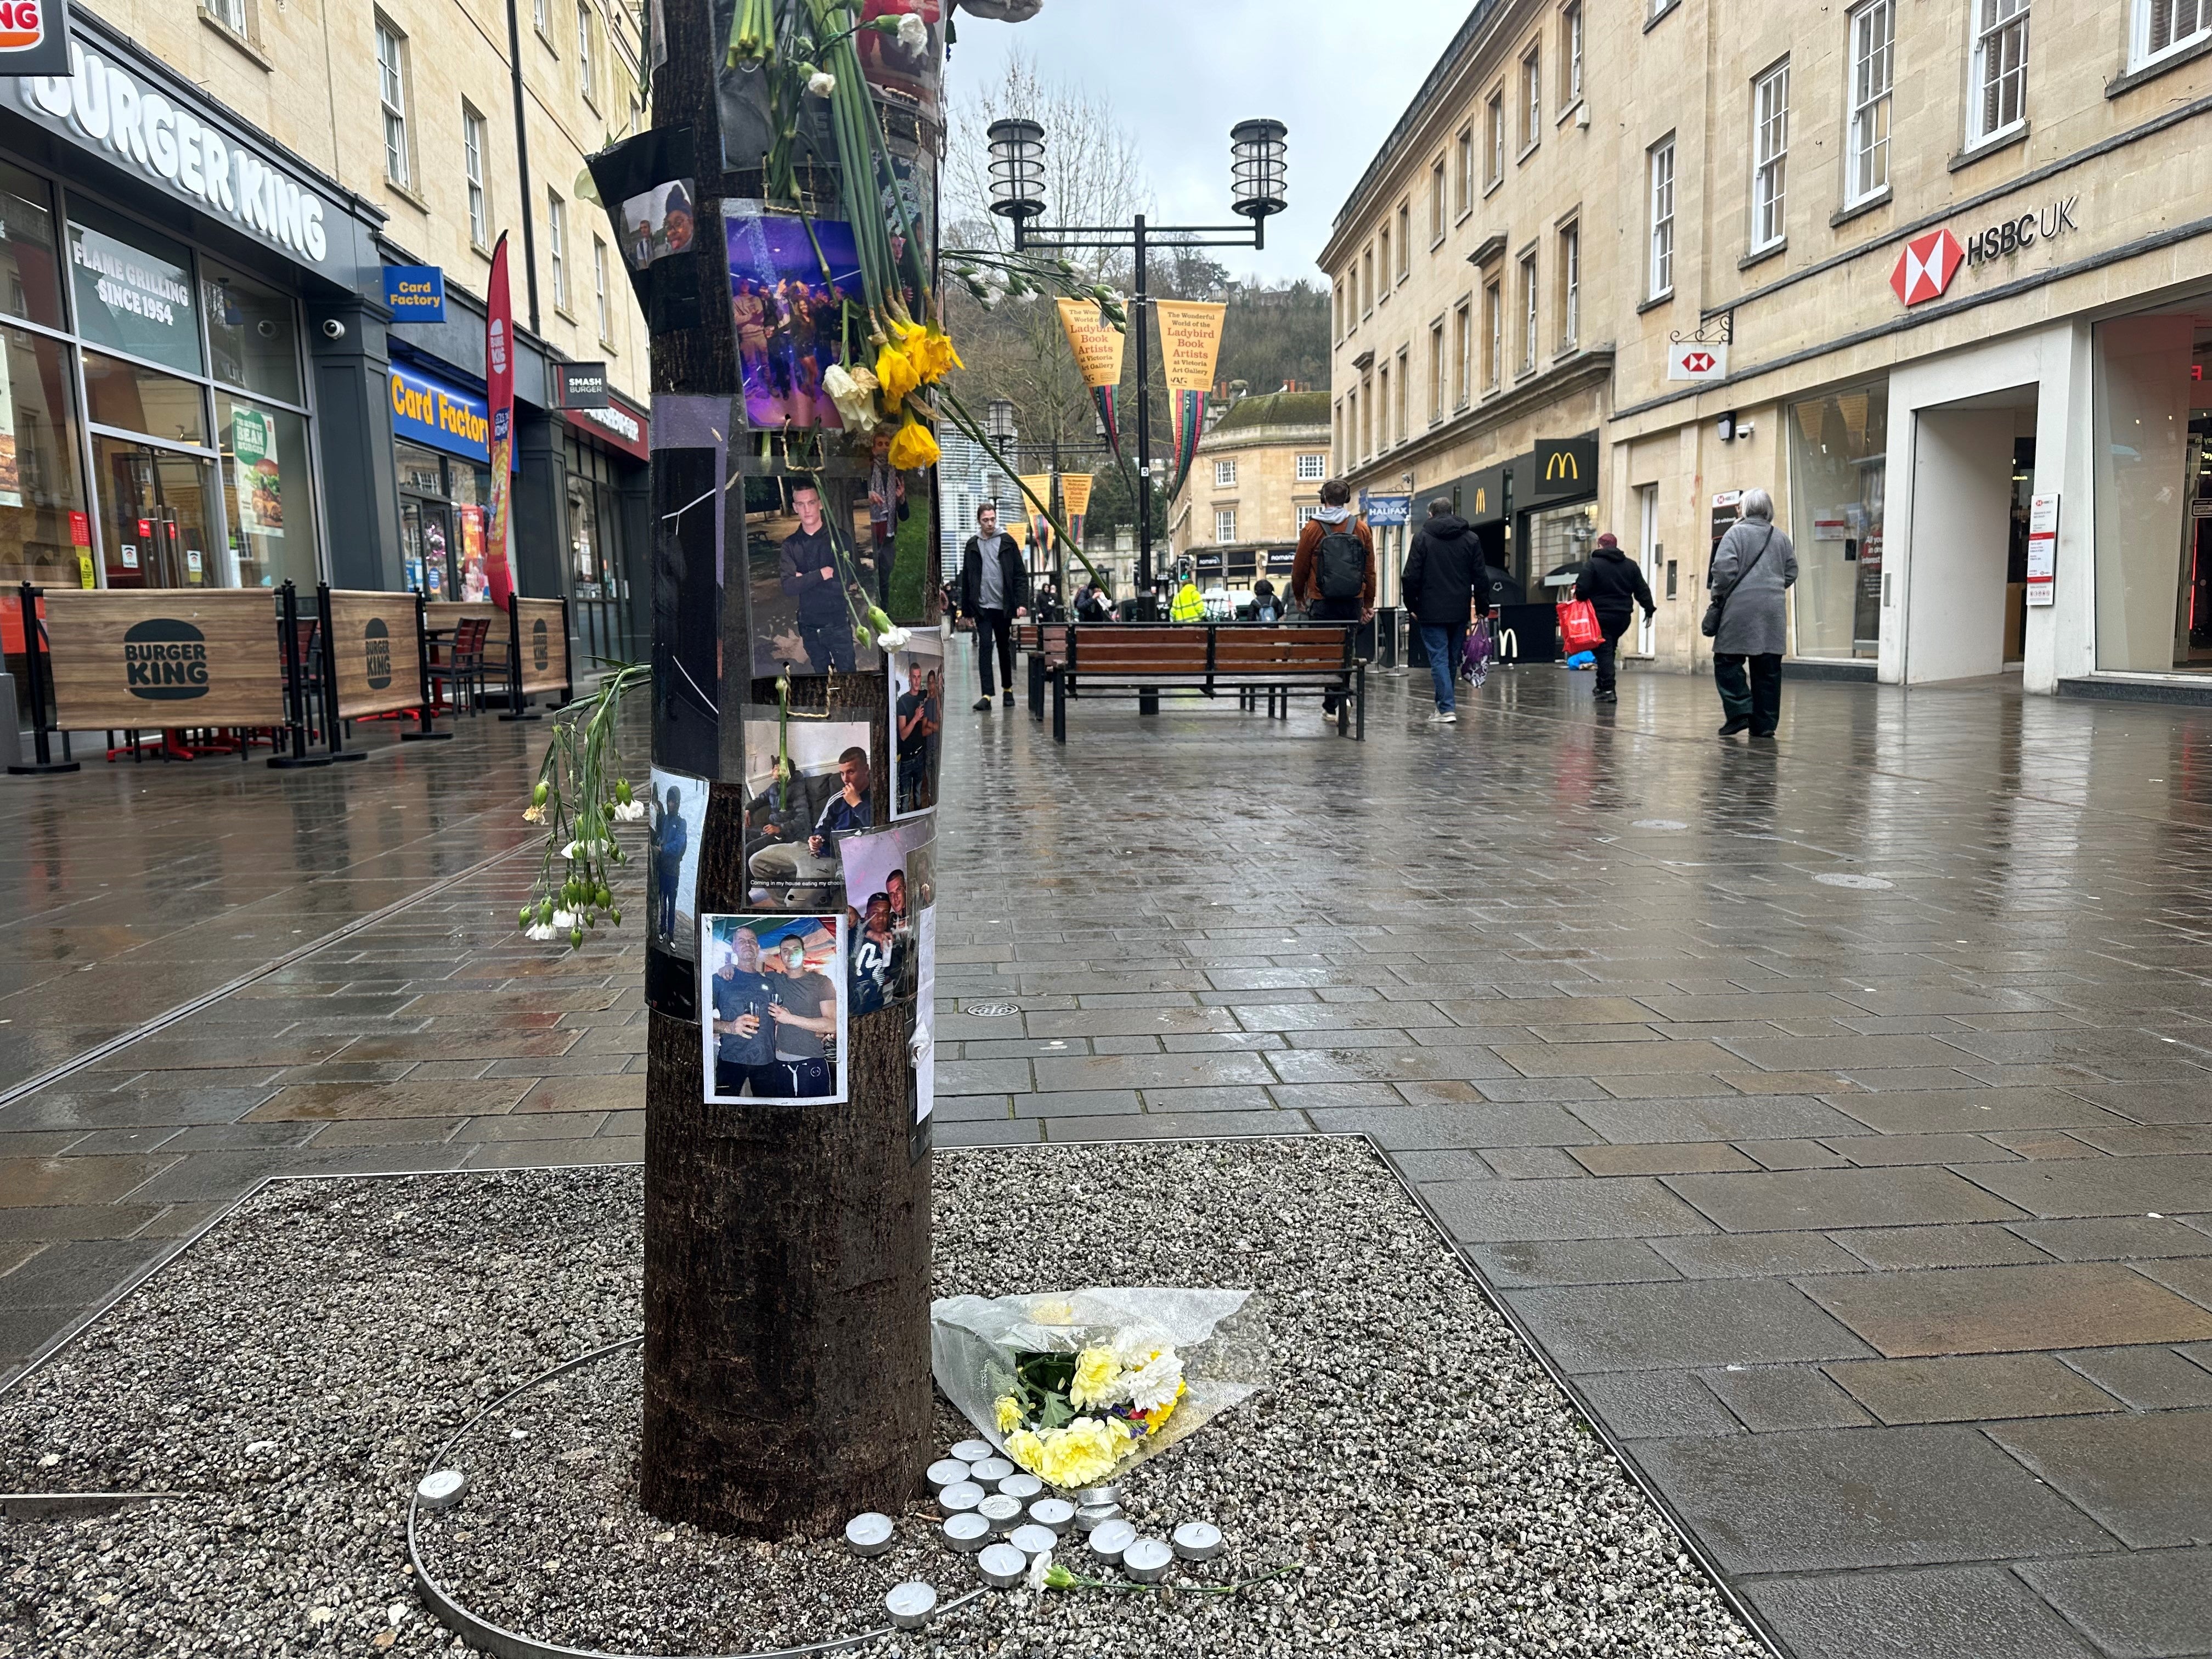 Tributes to Ben Moncrieff, a reminder of his death and the danger of knife crime. The display was taken down last week